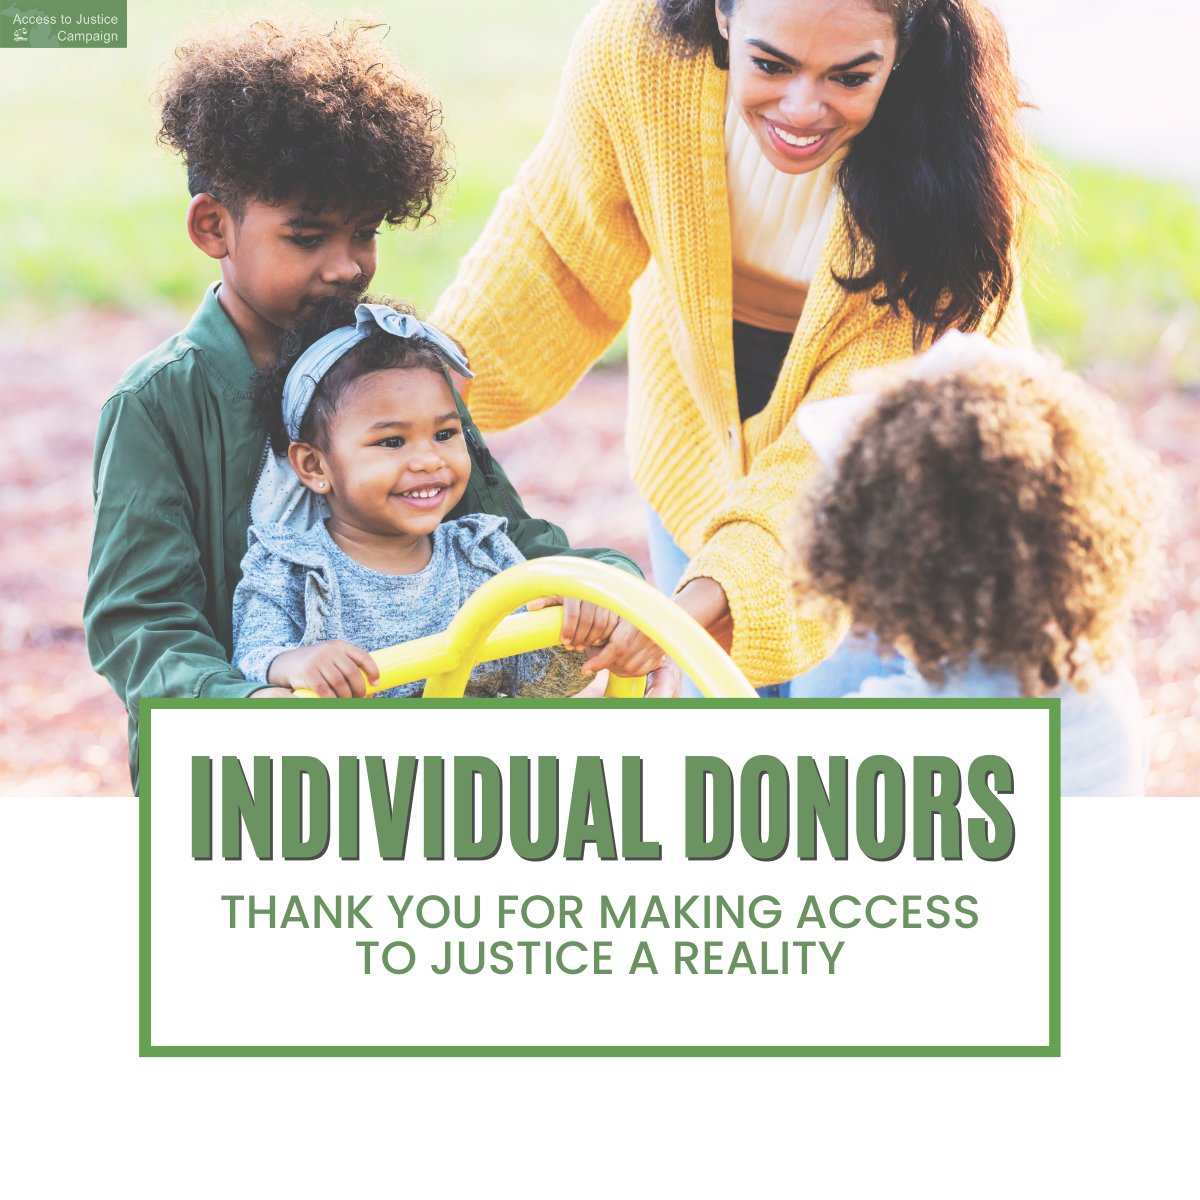 The Access to Justice Campaign is grateful to Individual Donors who champion access and fairness to the civil justice system.
To see the full list please visit, ow.ly/w9gX50OR0rj  #recognition #thankyou #atj #justice #legal